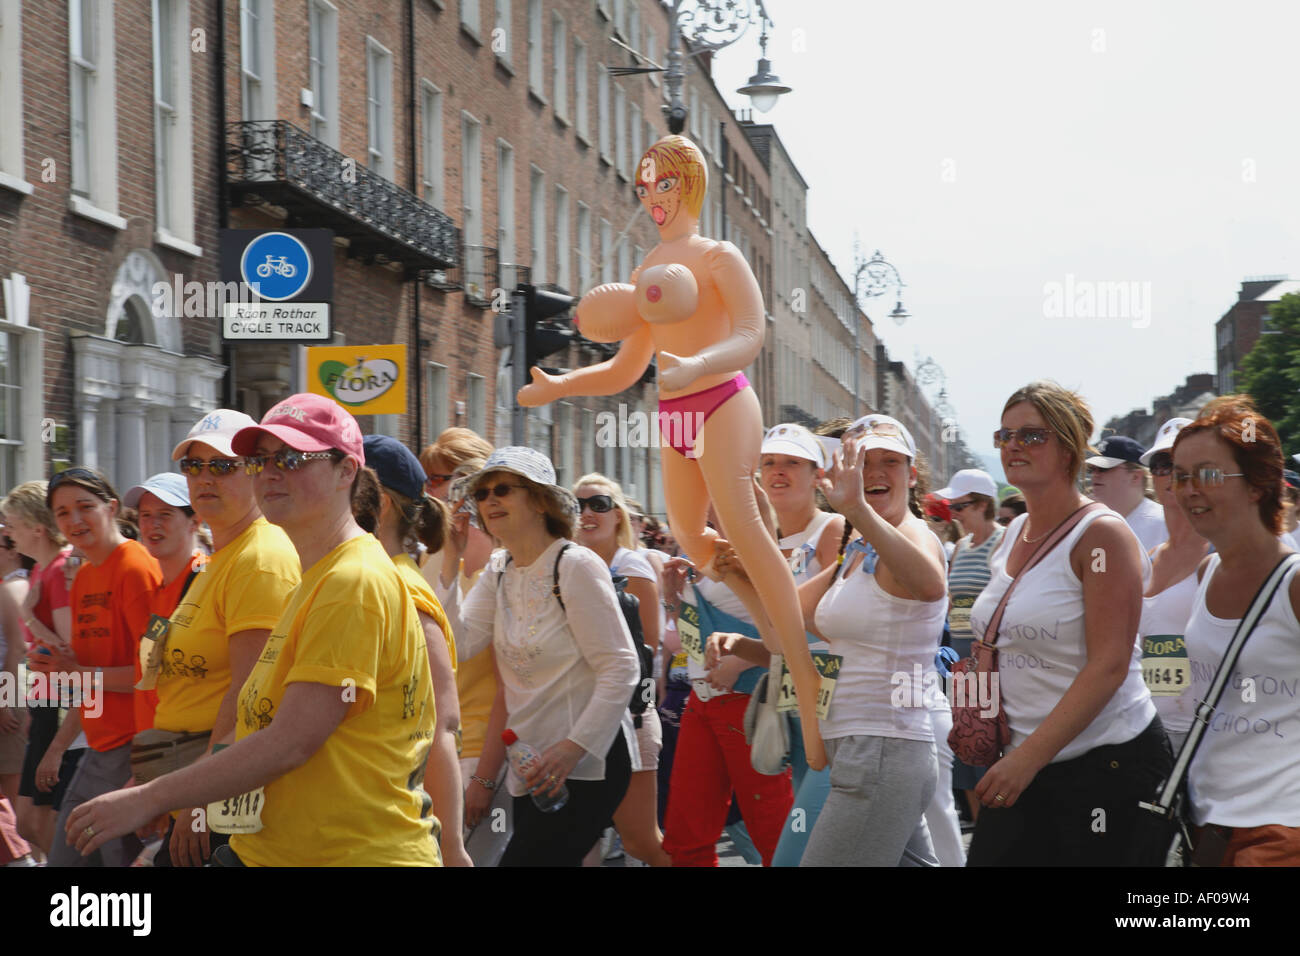 Inflatable doll being sported by some participants in women's mini marathon, Dublin City, June 2006 Stock Photo